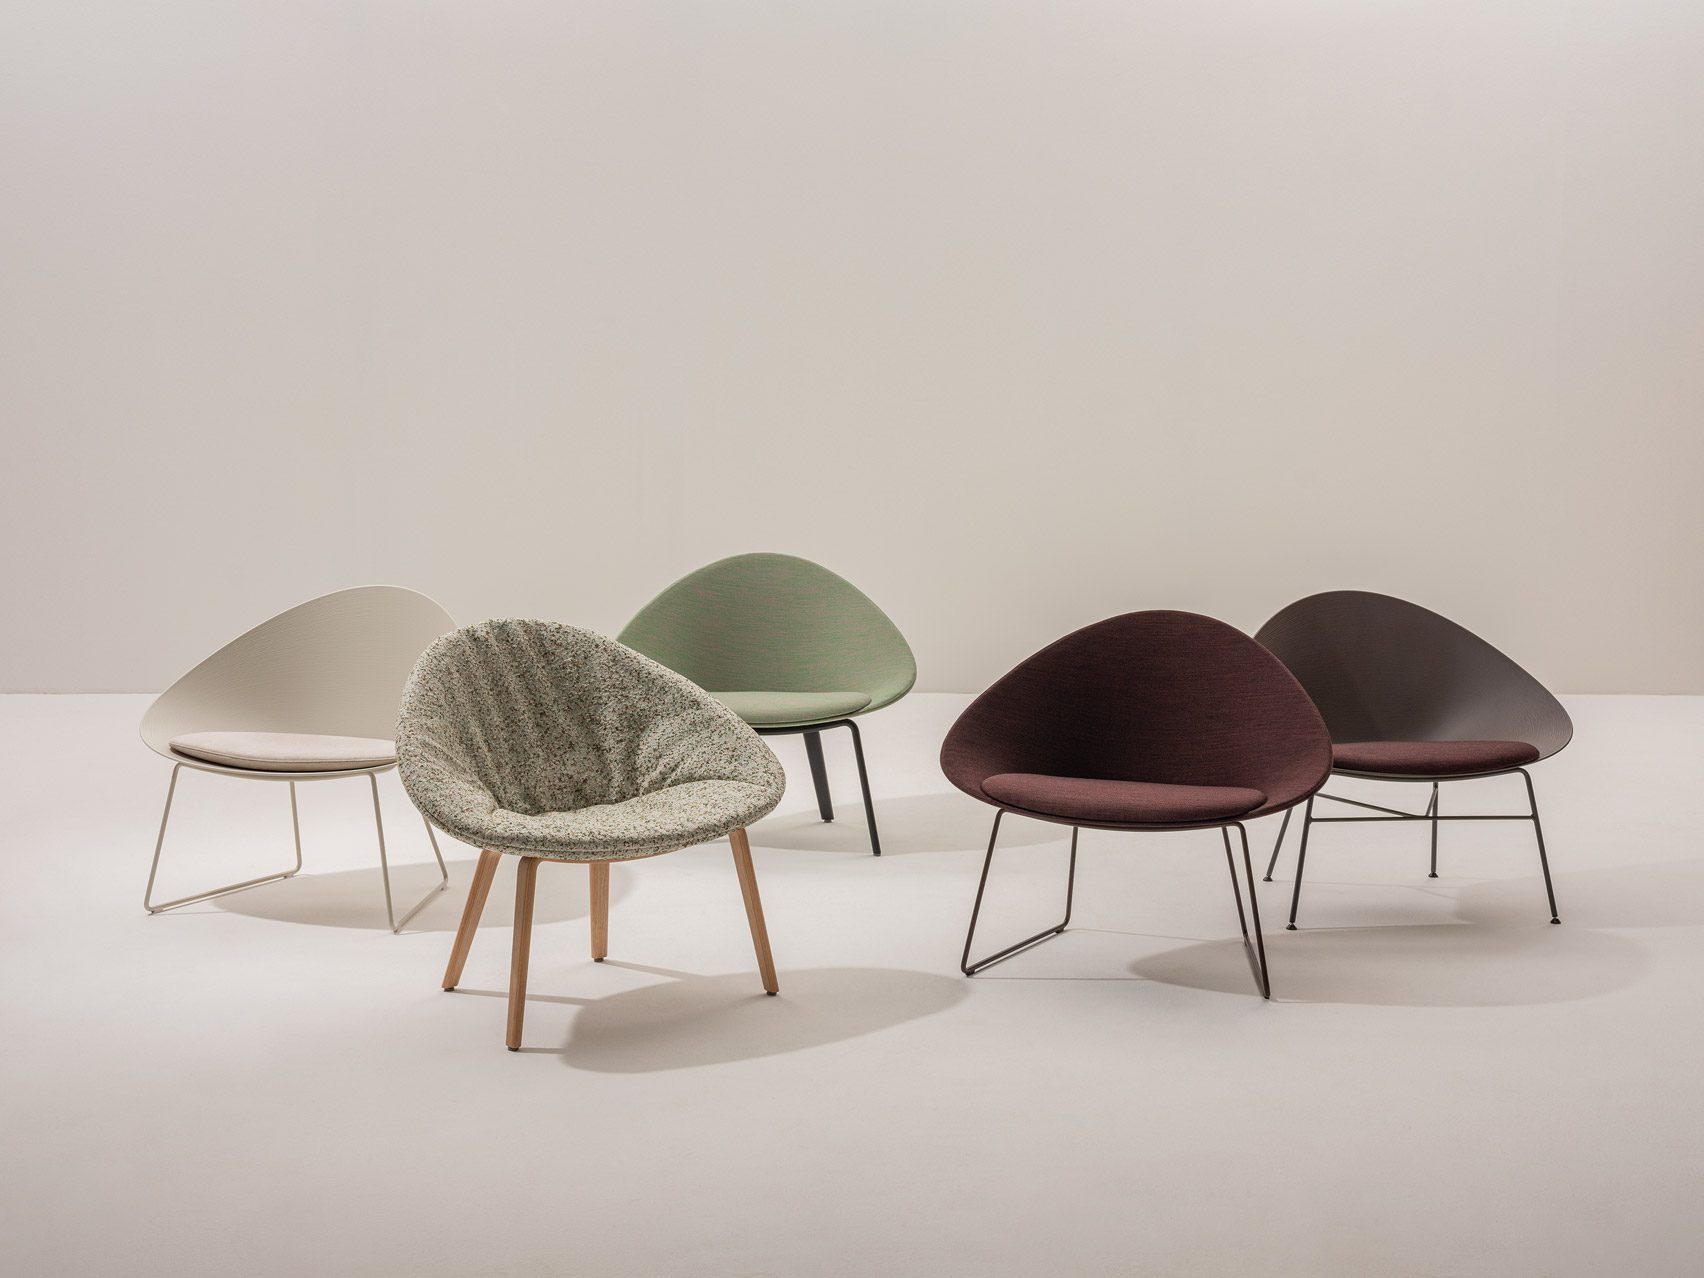 A selection of colourful chairs